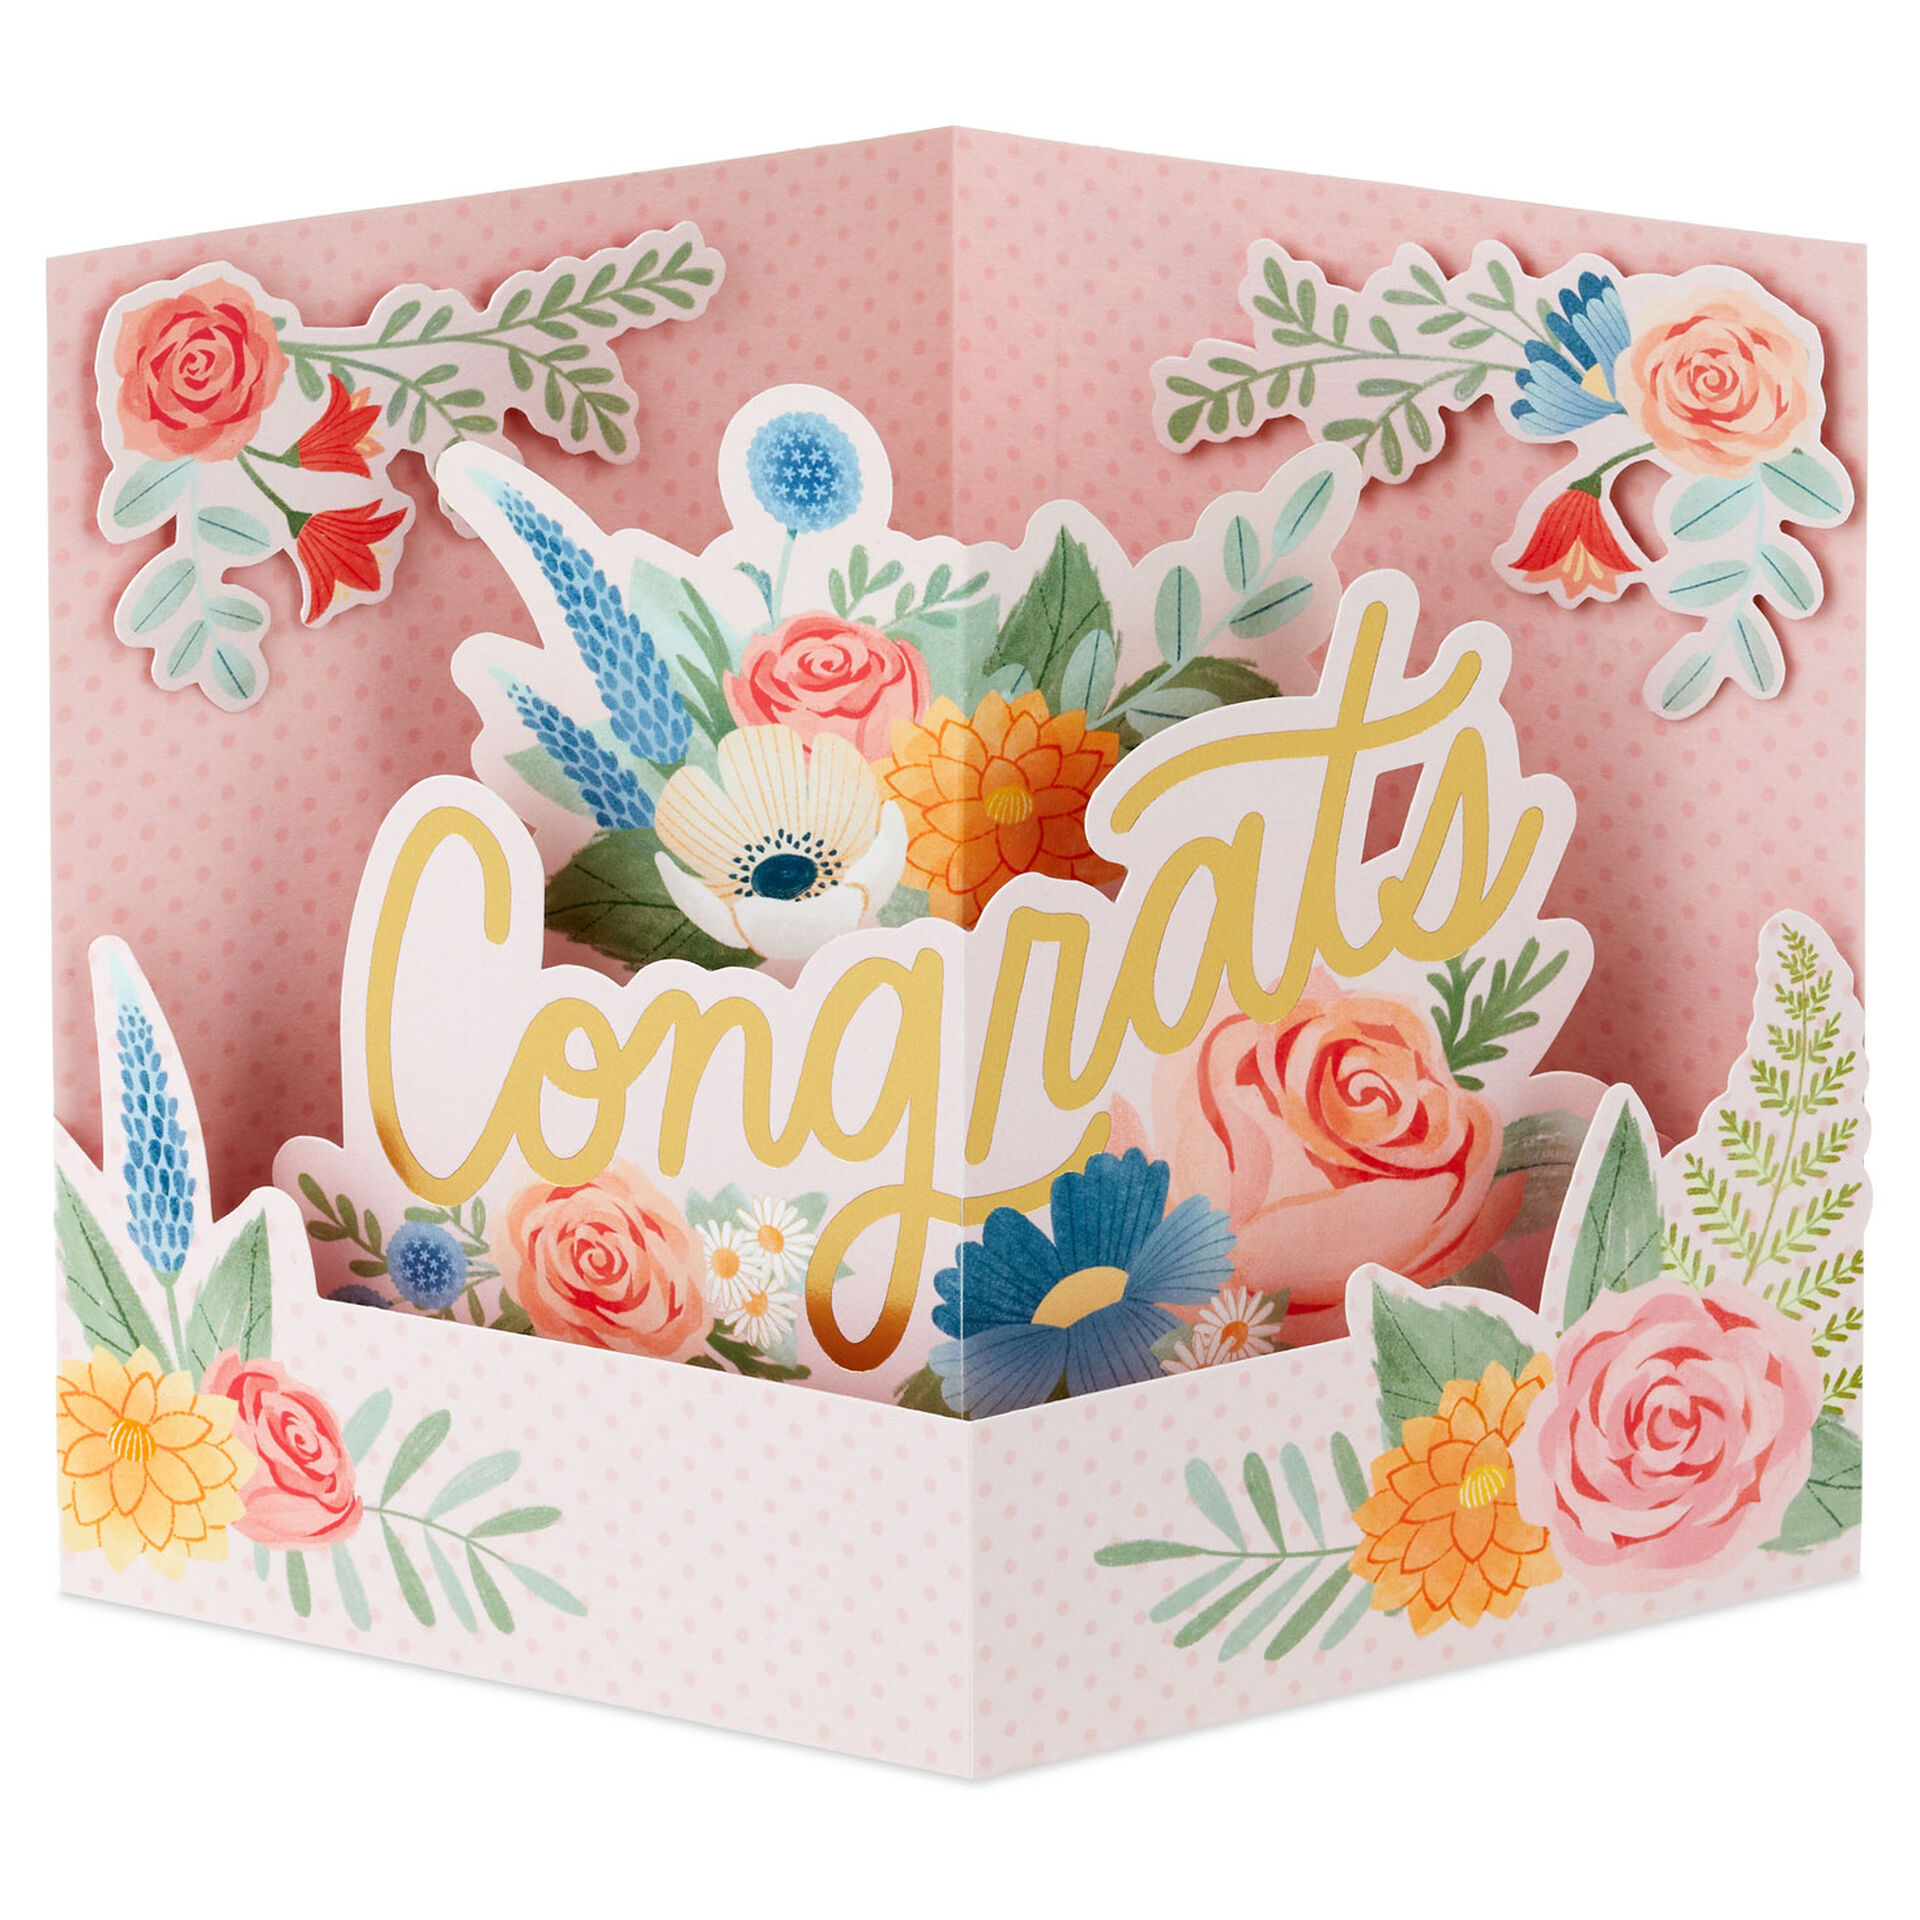 Flowers-and-Congrats-3D-PopUp-Wedding-Card_699WDR1227_02